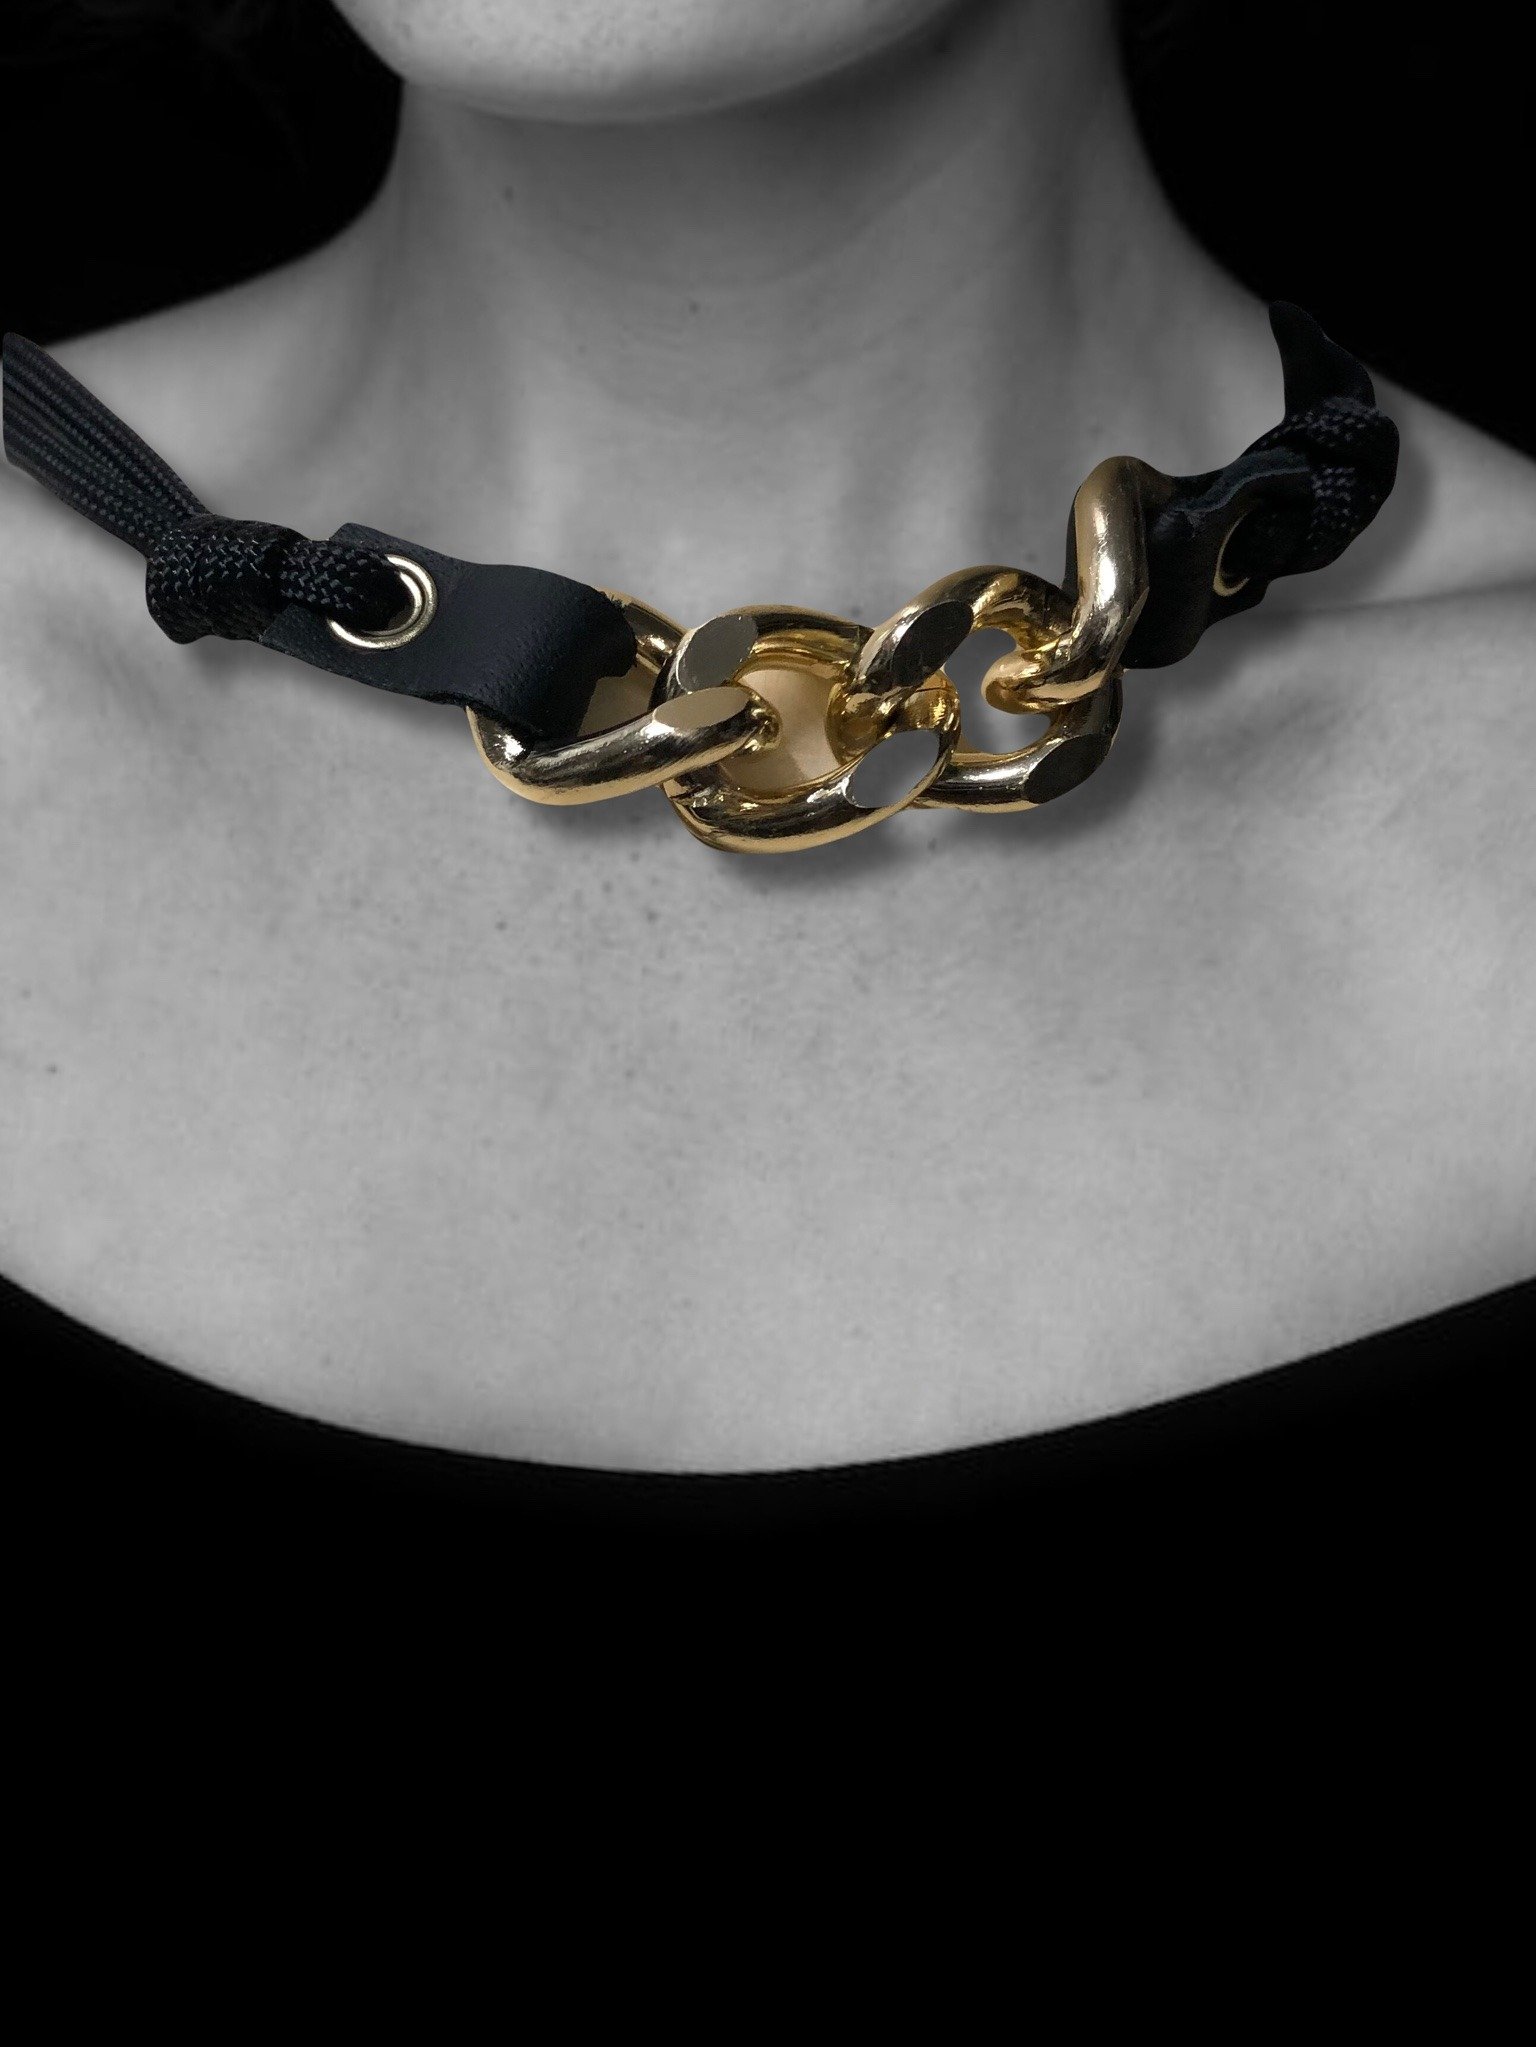 Black & Gold Fashions chain leather choker necklace (4).jpg